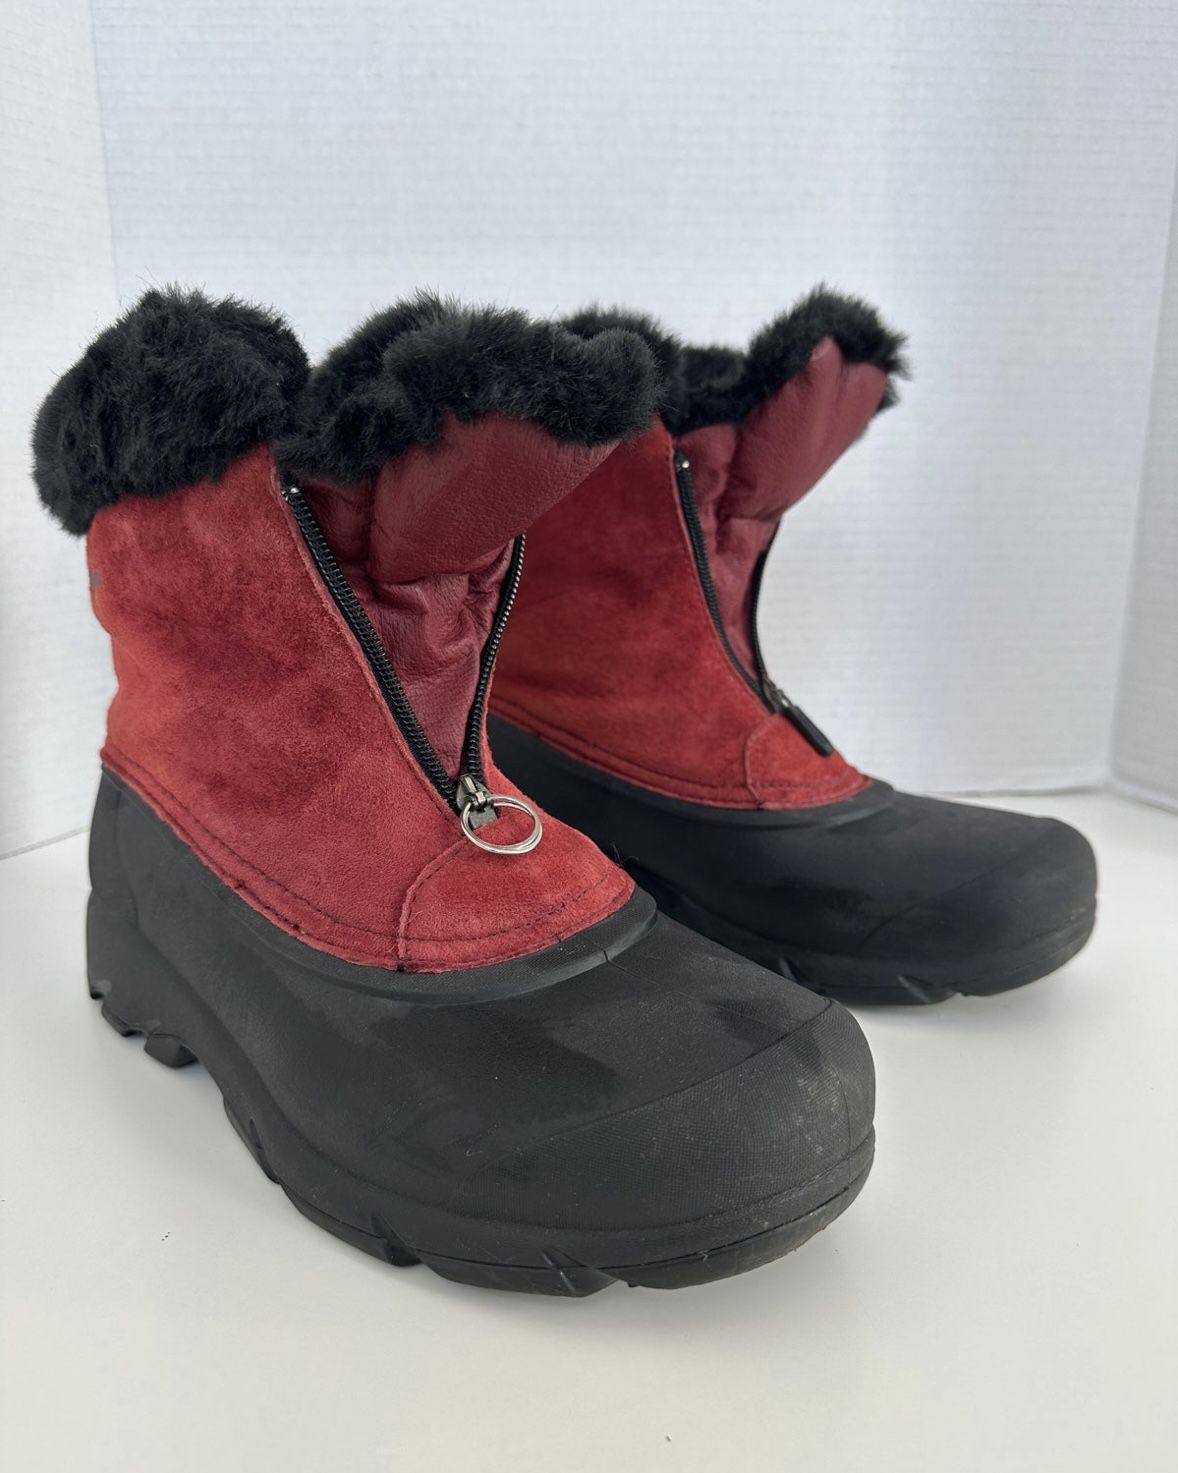 Sorel Snow Angel Zip Winter Boots Red Suede Faux Fur Lined Front Zip size 9